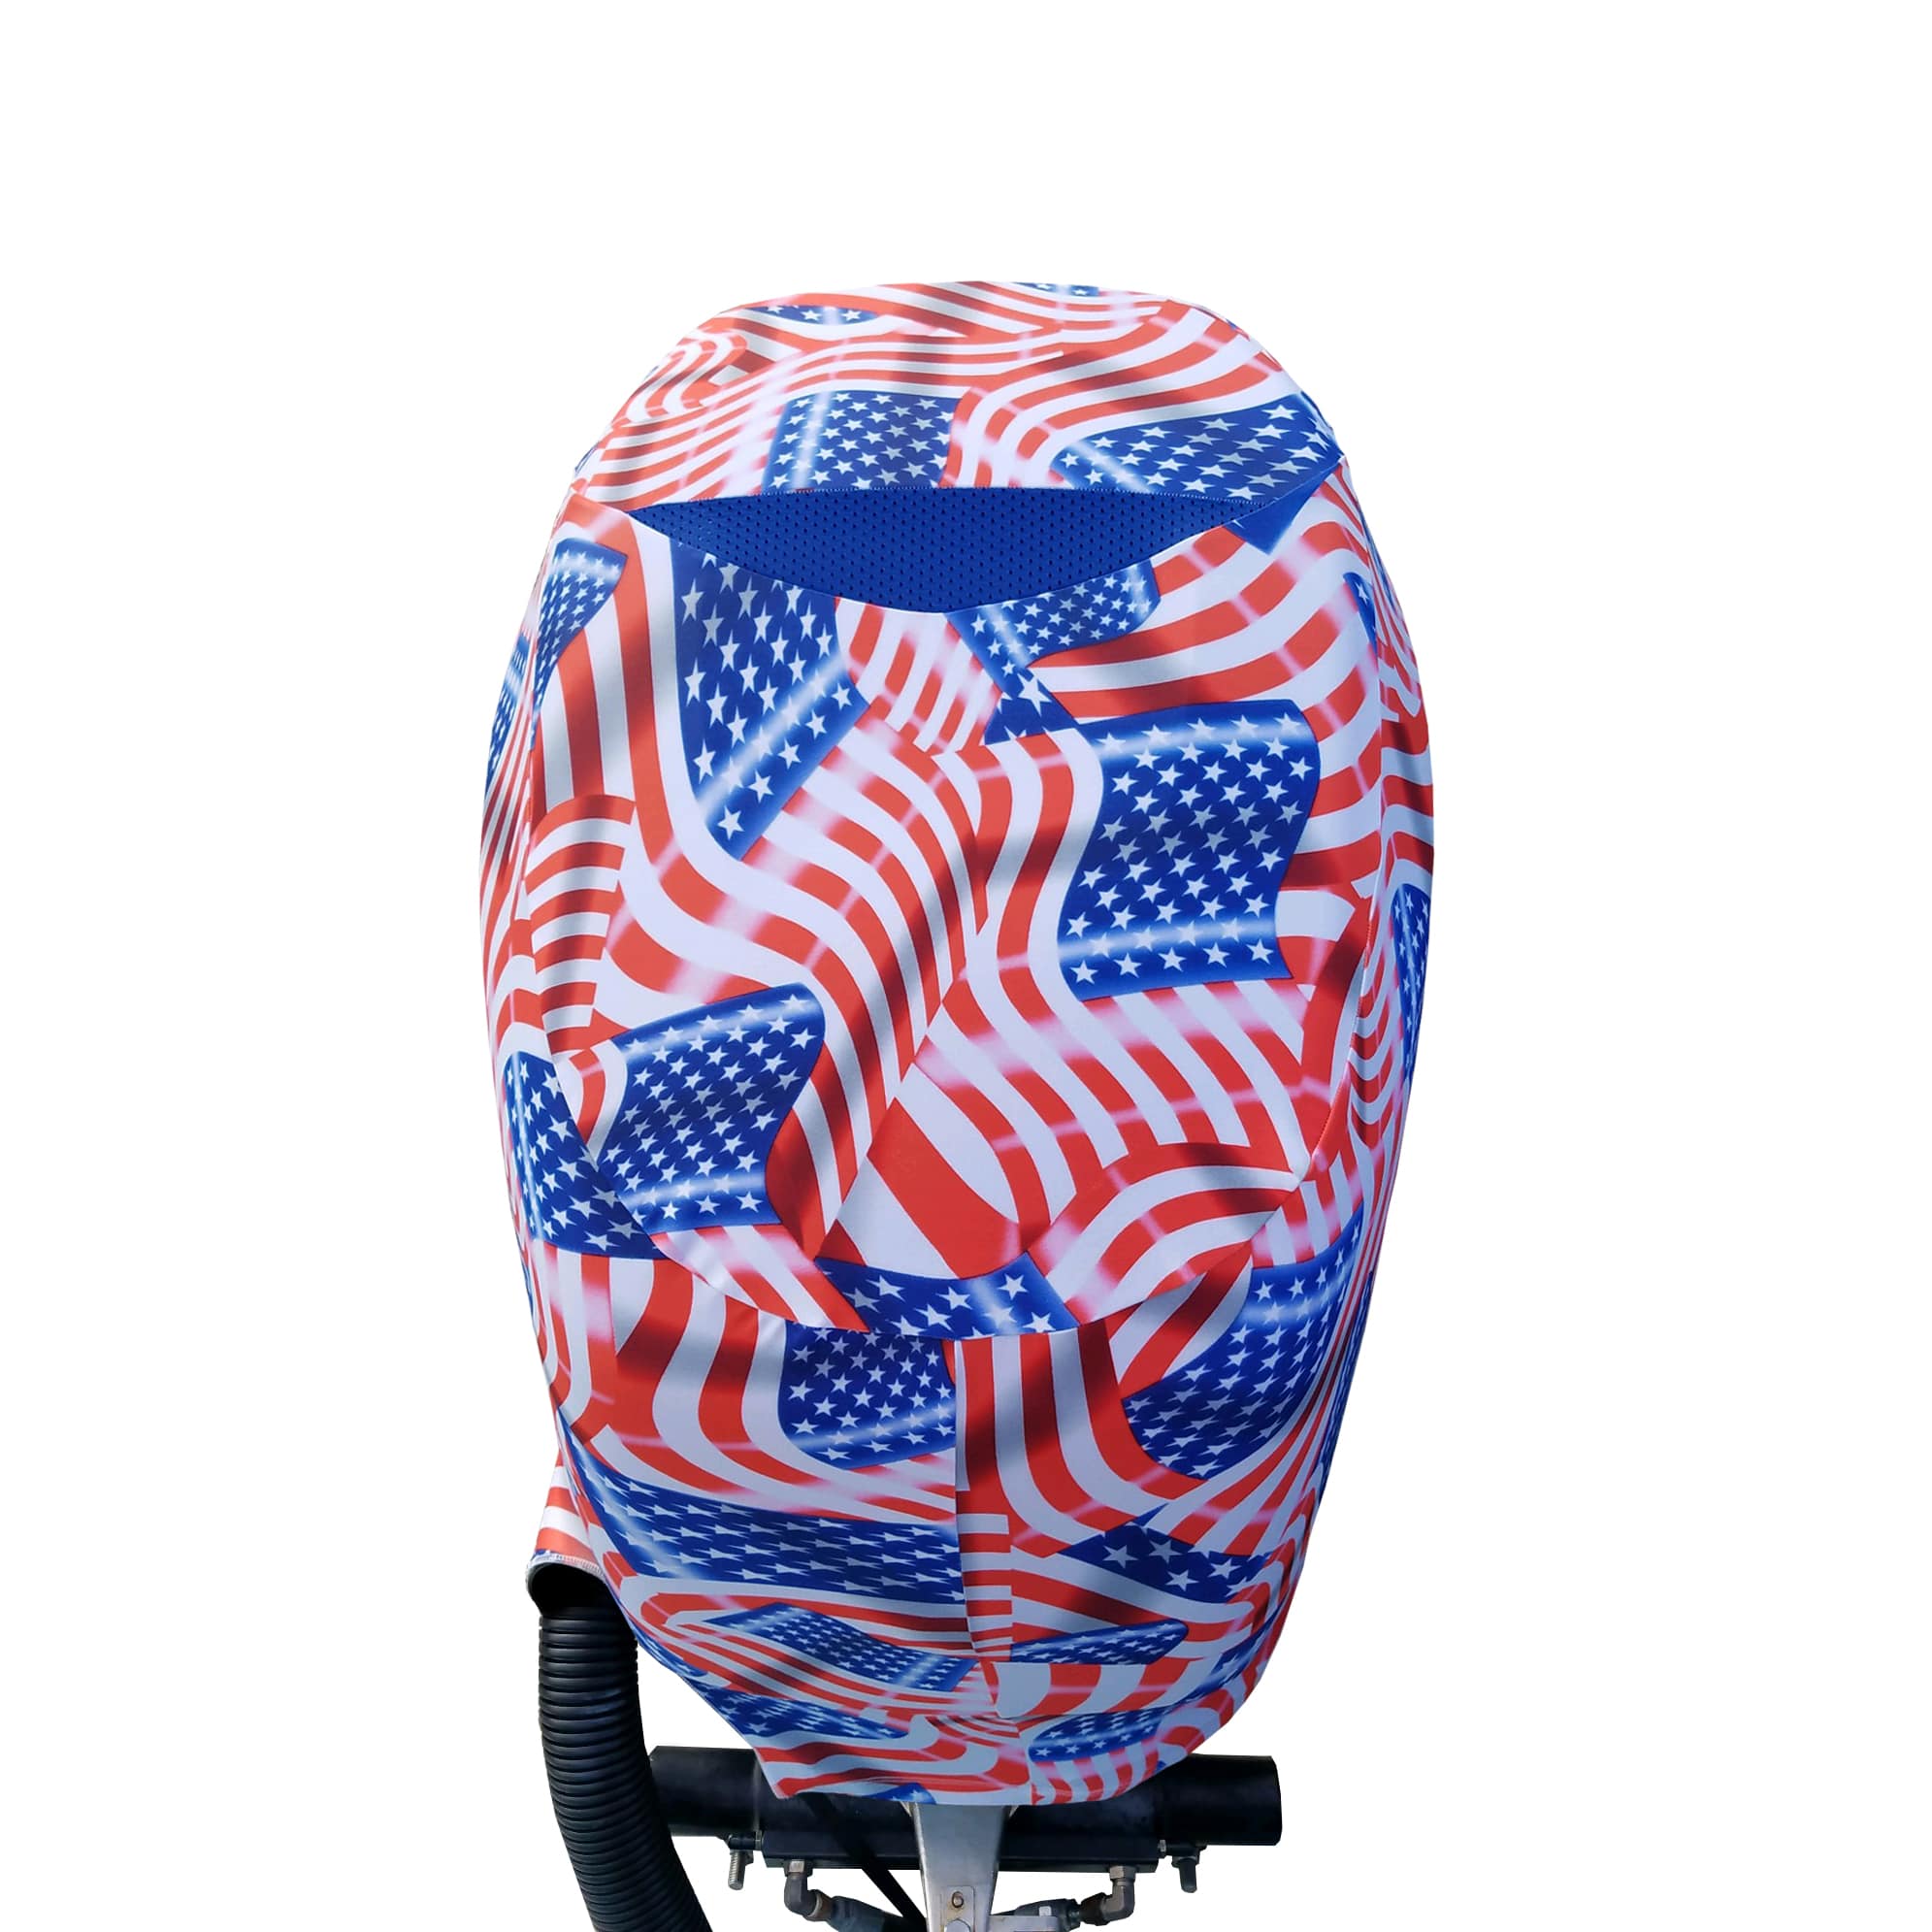 Made in USA to Stay on While You Run! OUTERENVY American Patriot Outboard Motor Cover for Yamaha Suzuki and Mercury